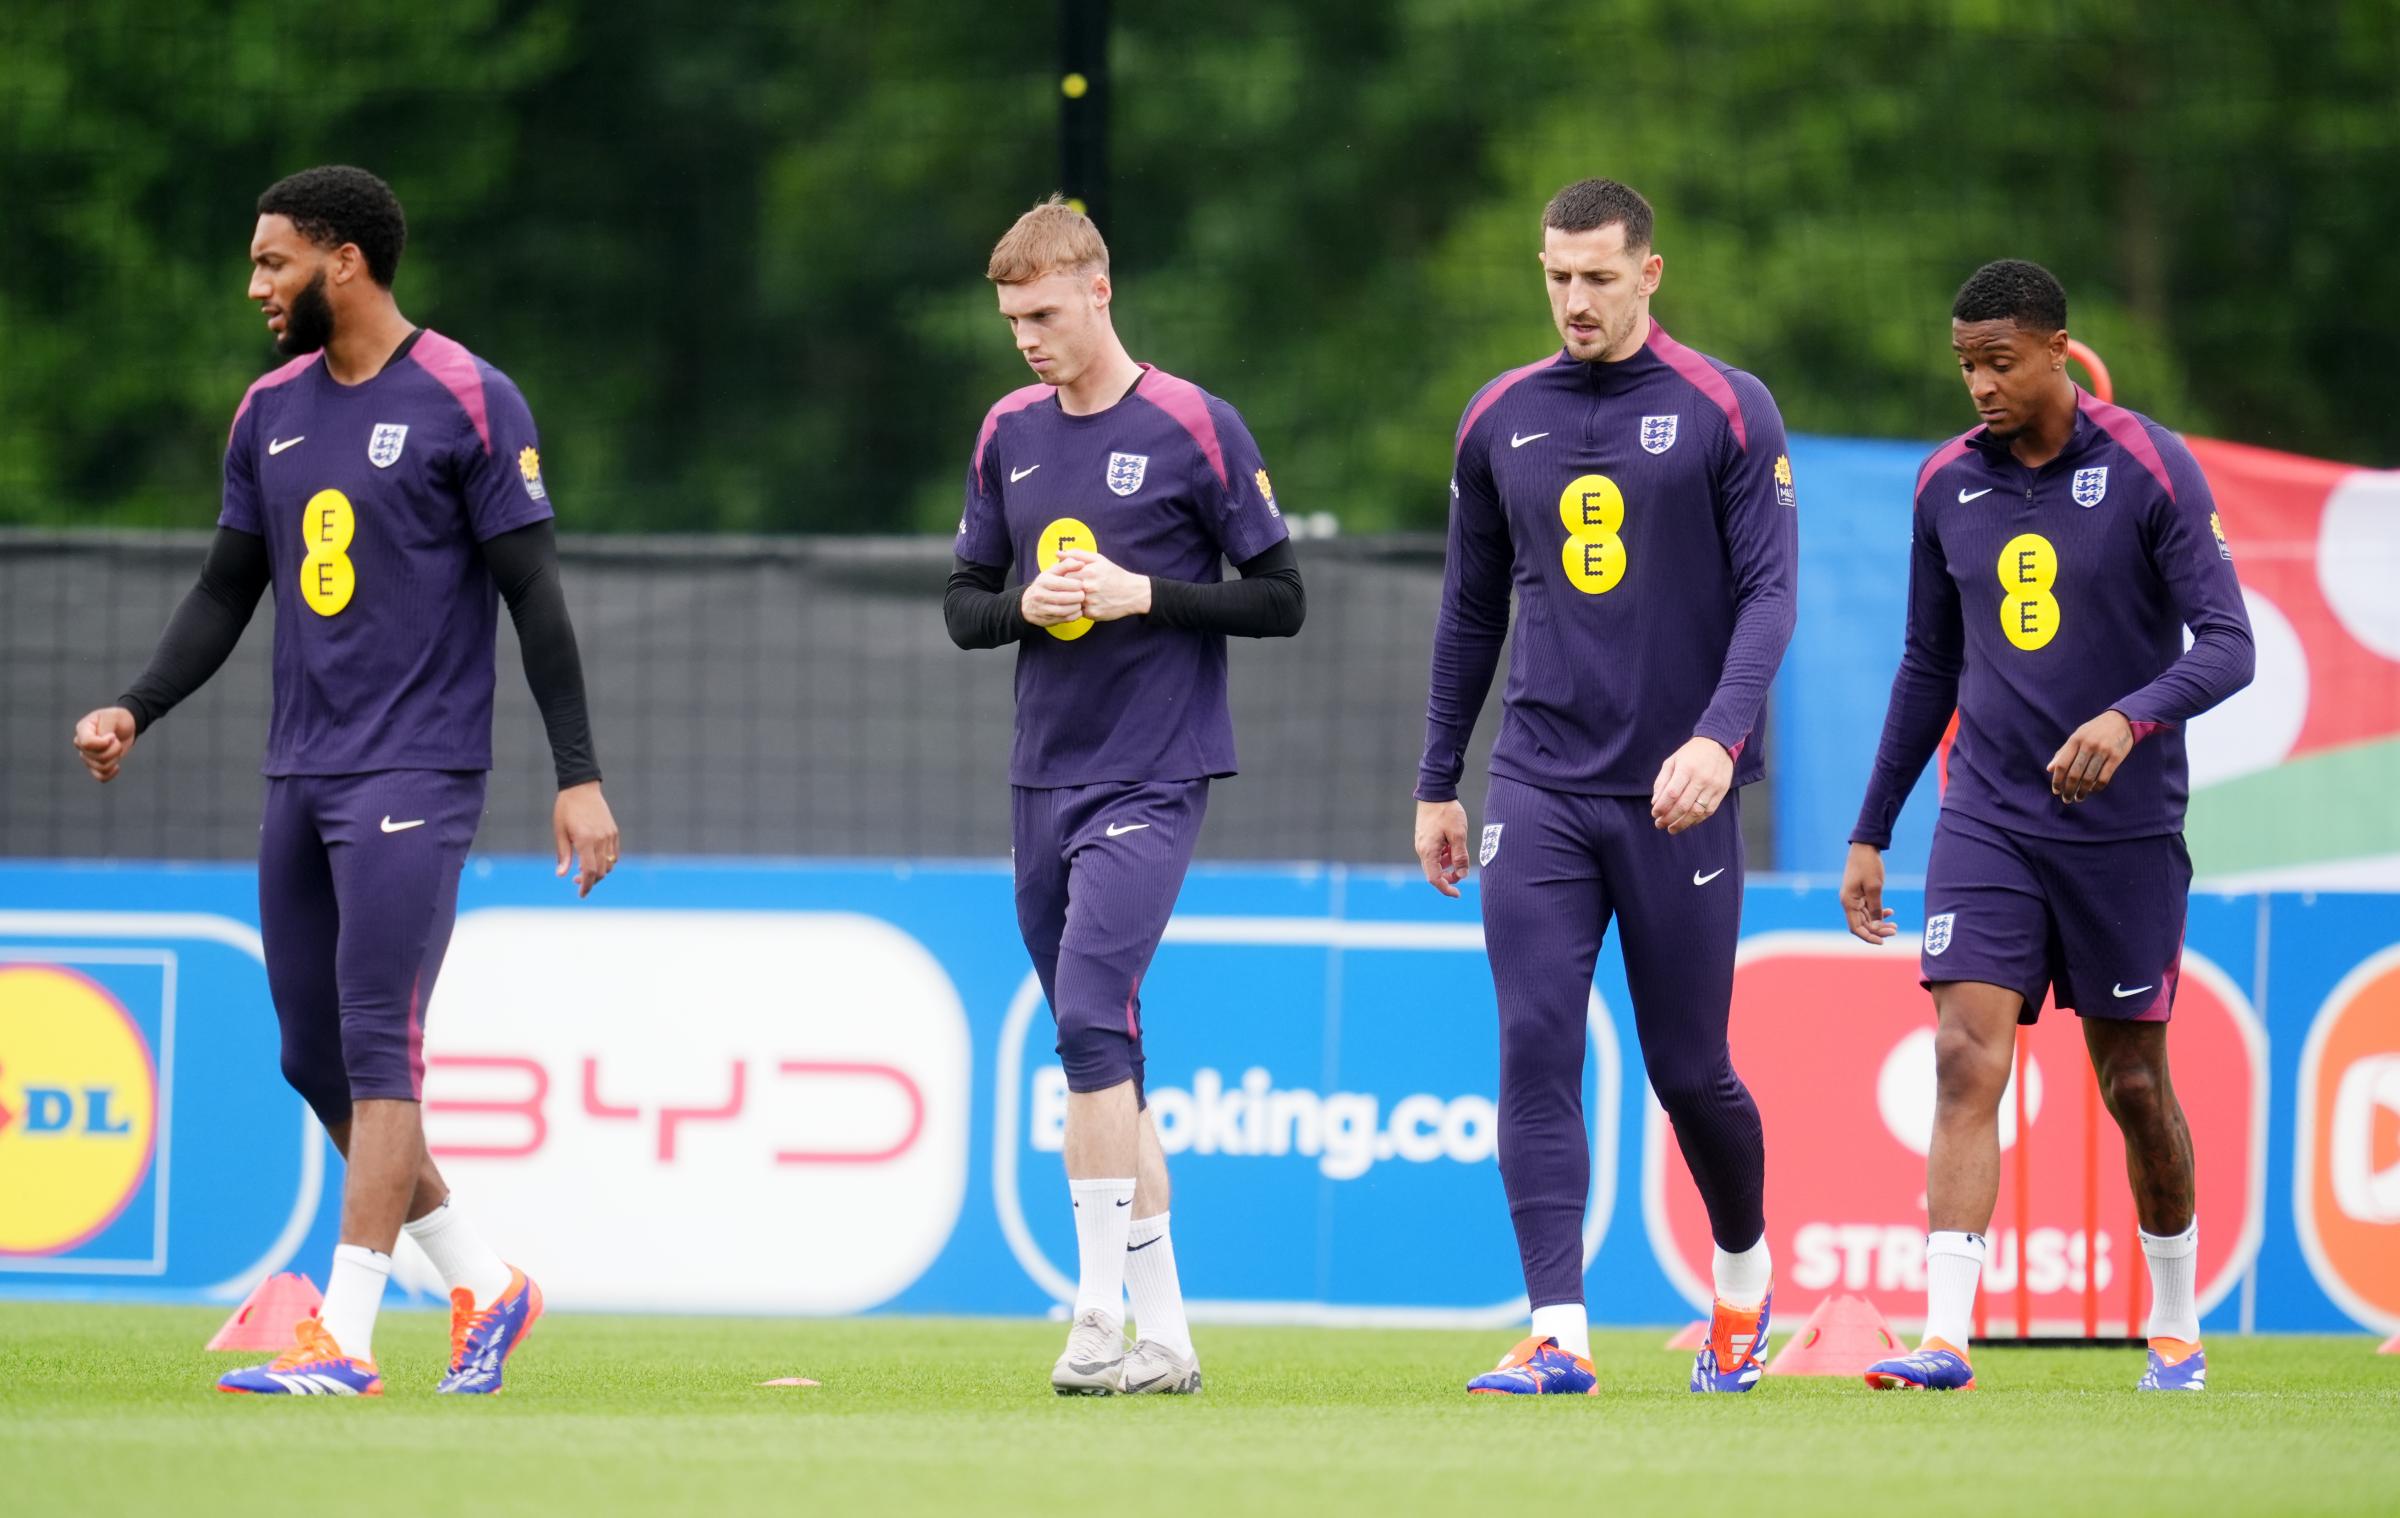 Lewis Dunk mong England players training after Denmark draw